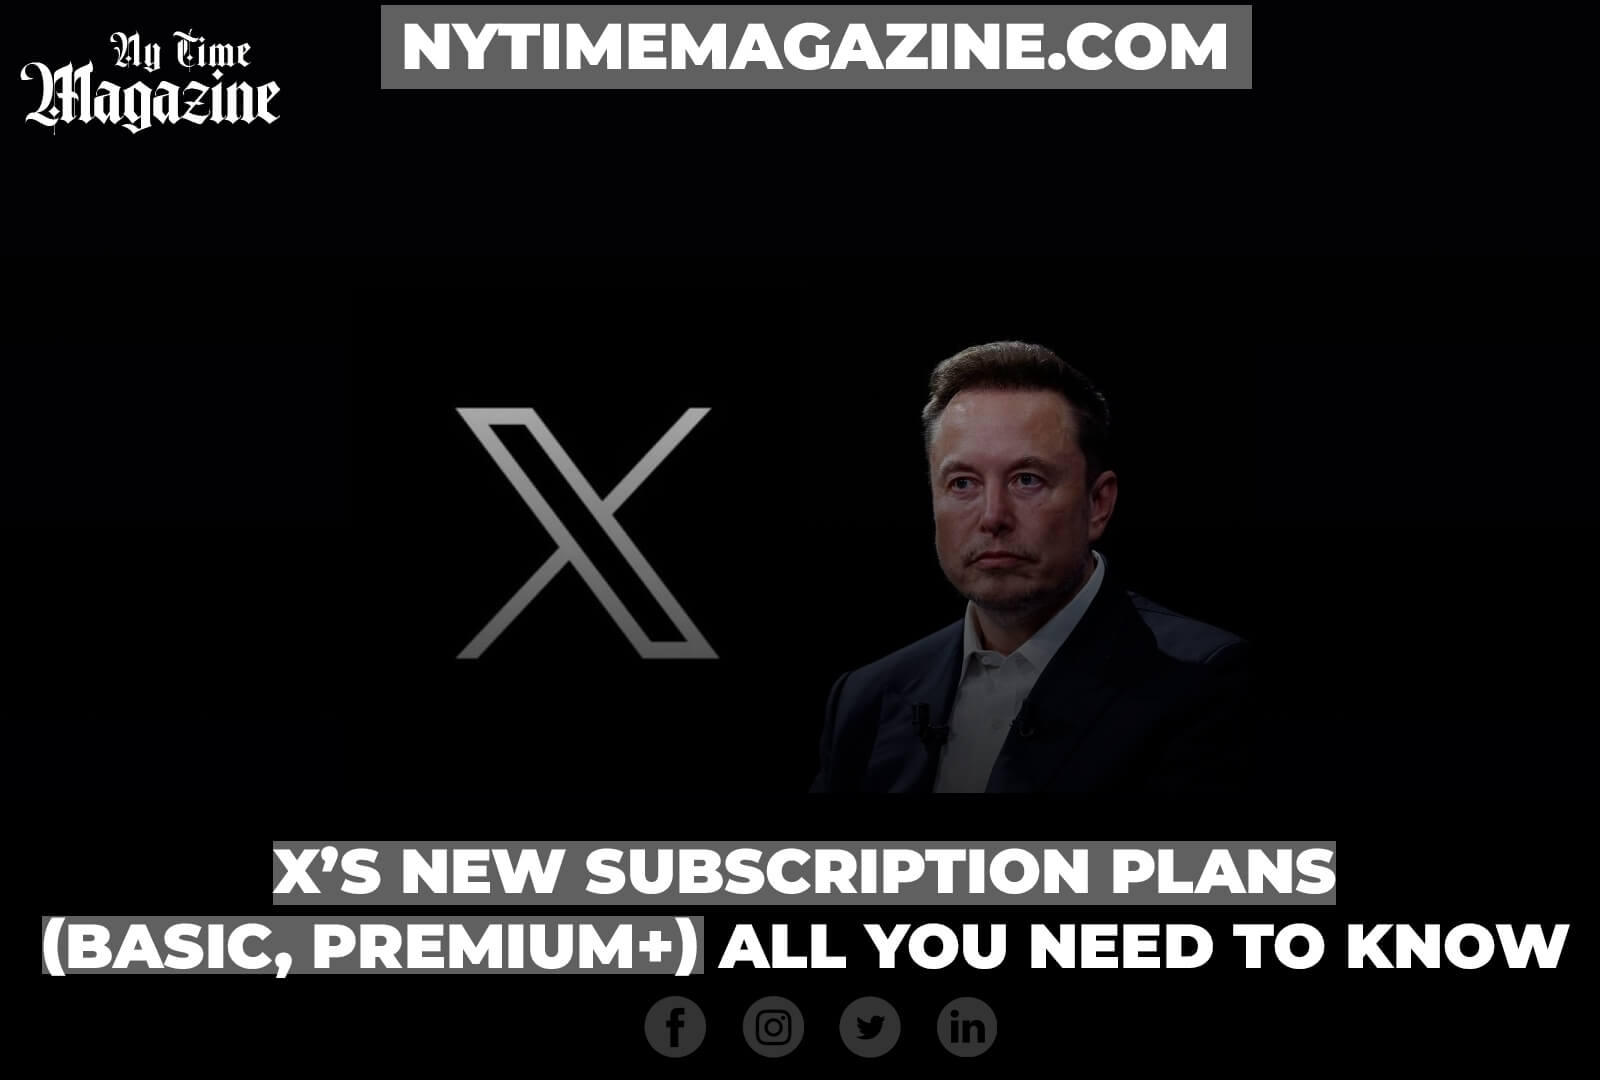 X’s New Subscription Plans. (Basic, Premium+). All You Need to Know